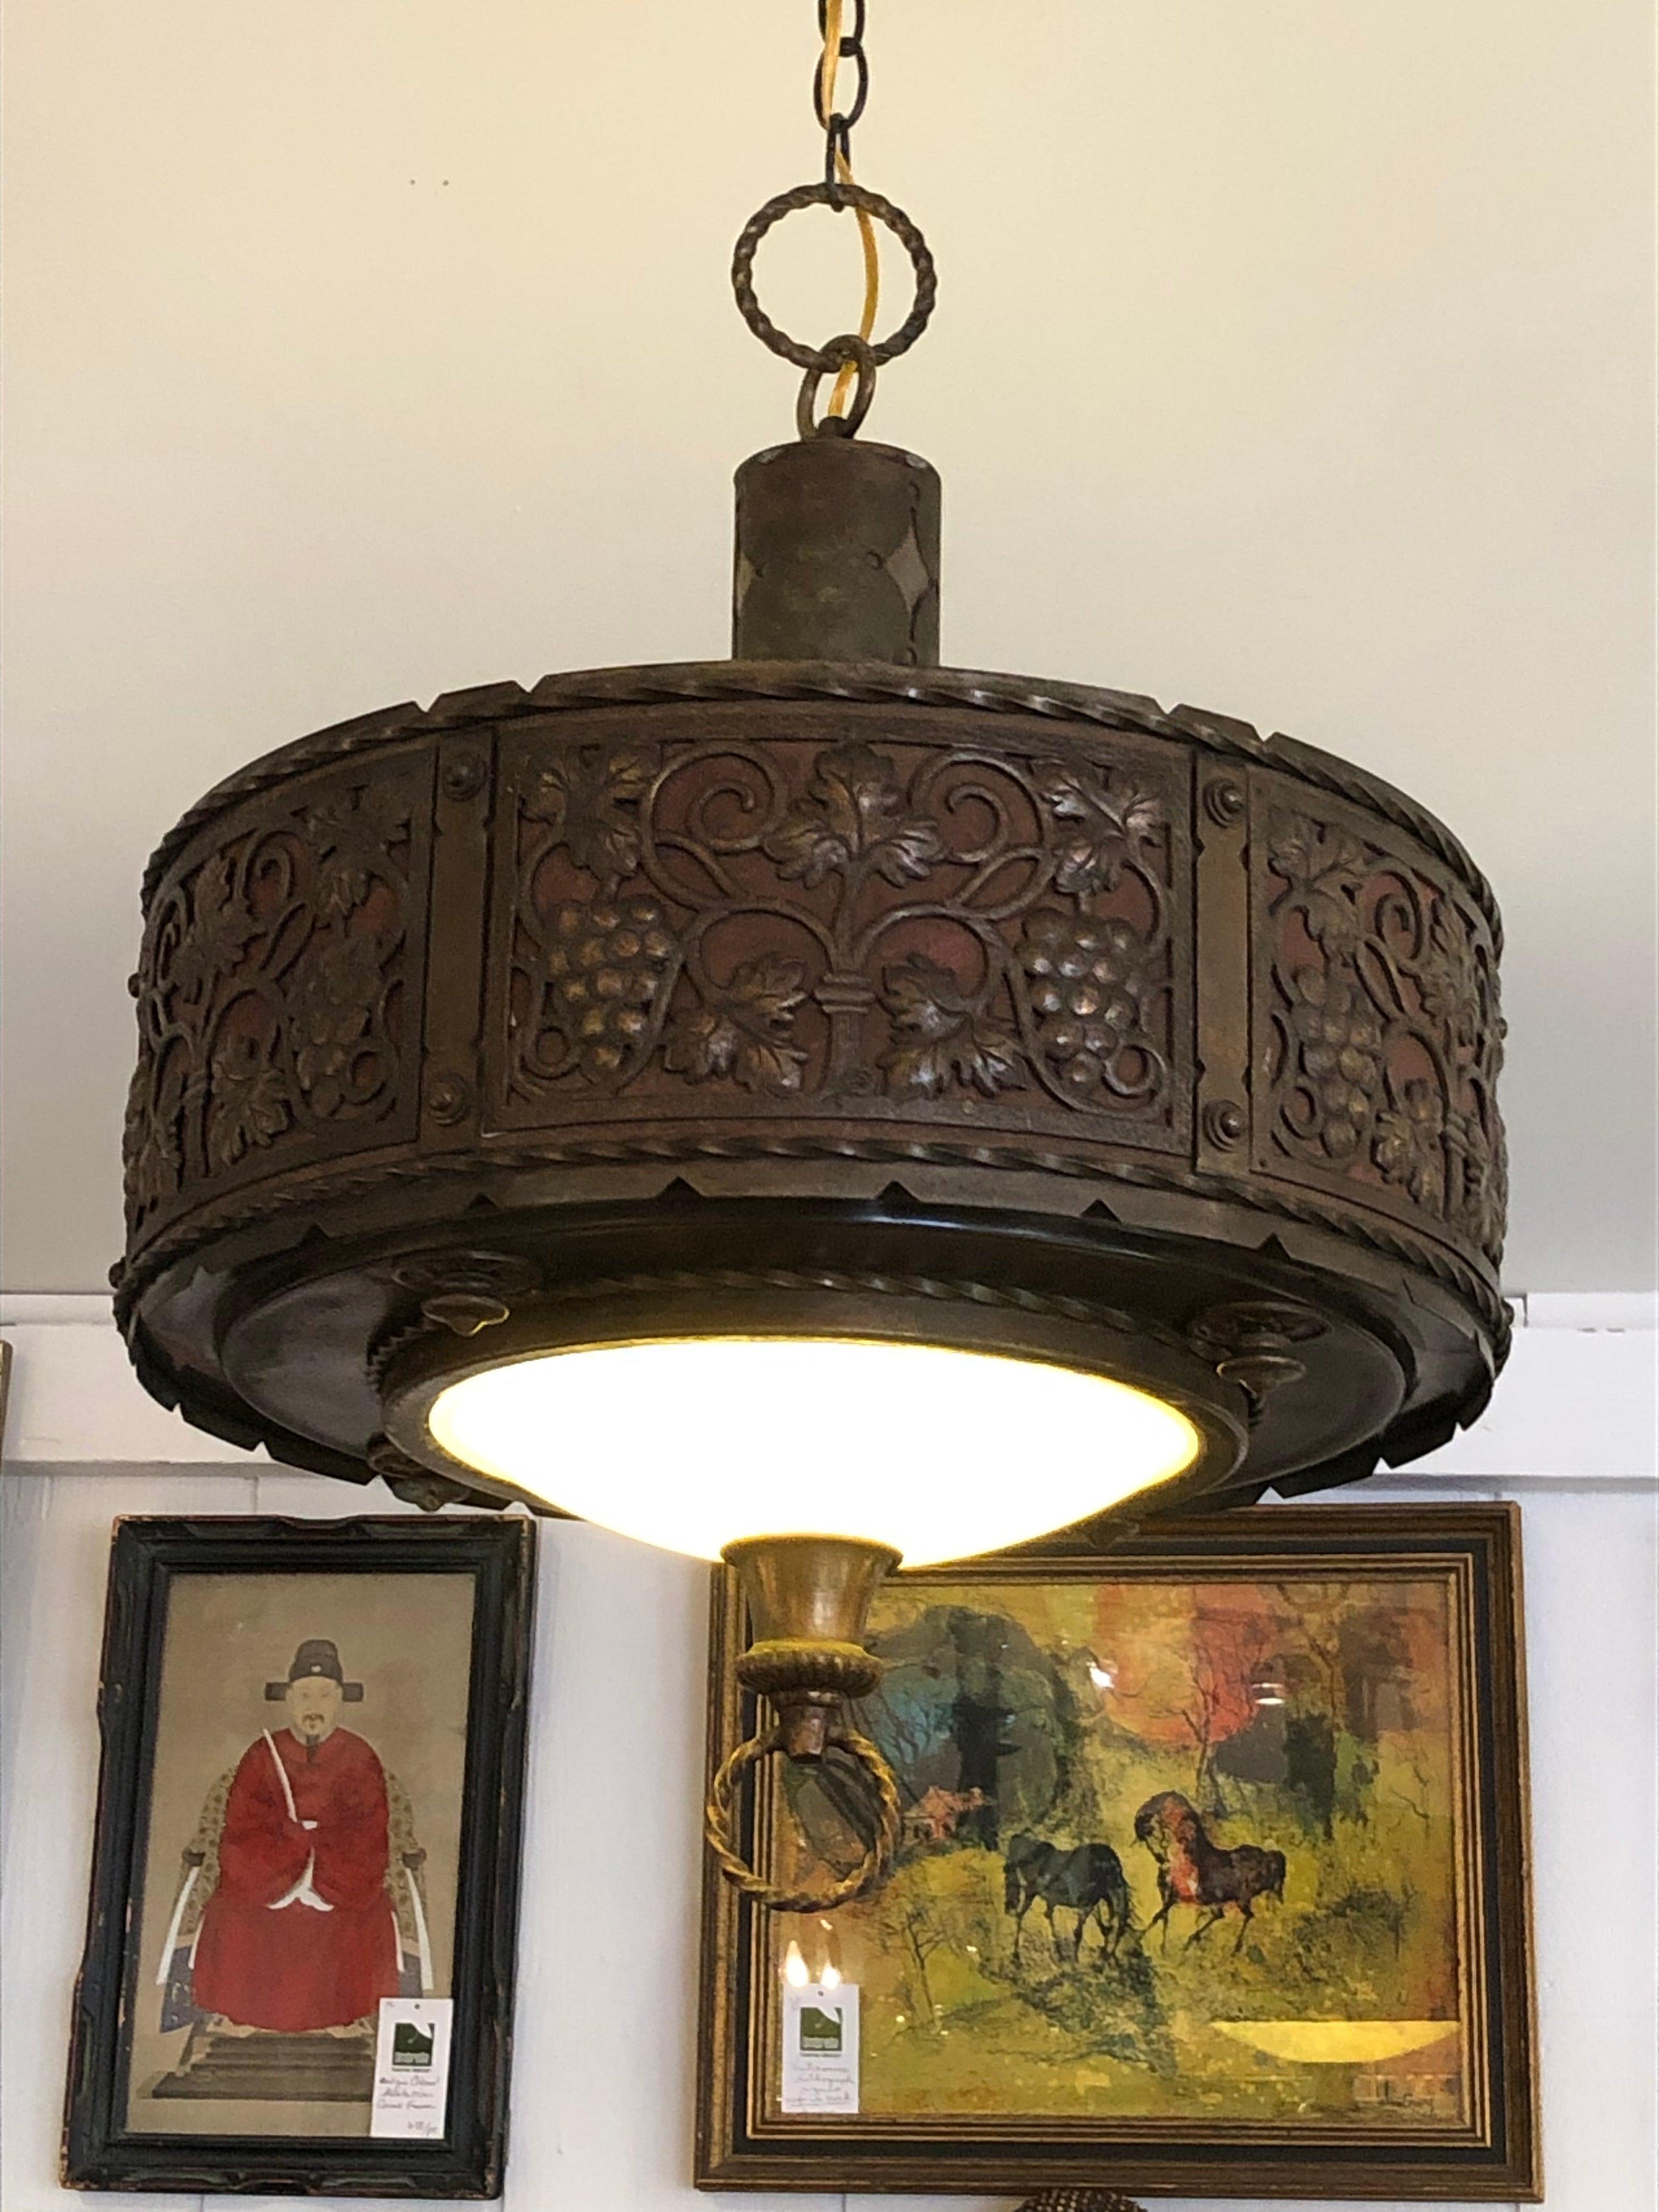 Gorgeous embossed copper and brass light fixture in the manner of Oscar Bach having wonderful shape with internal yellow hue art glass bottom.
Note: Pair available

(Sorensen)